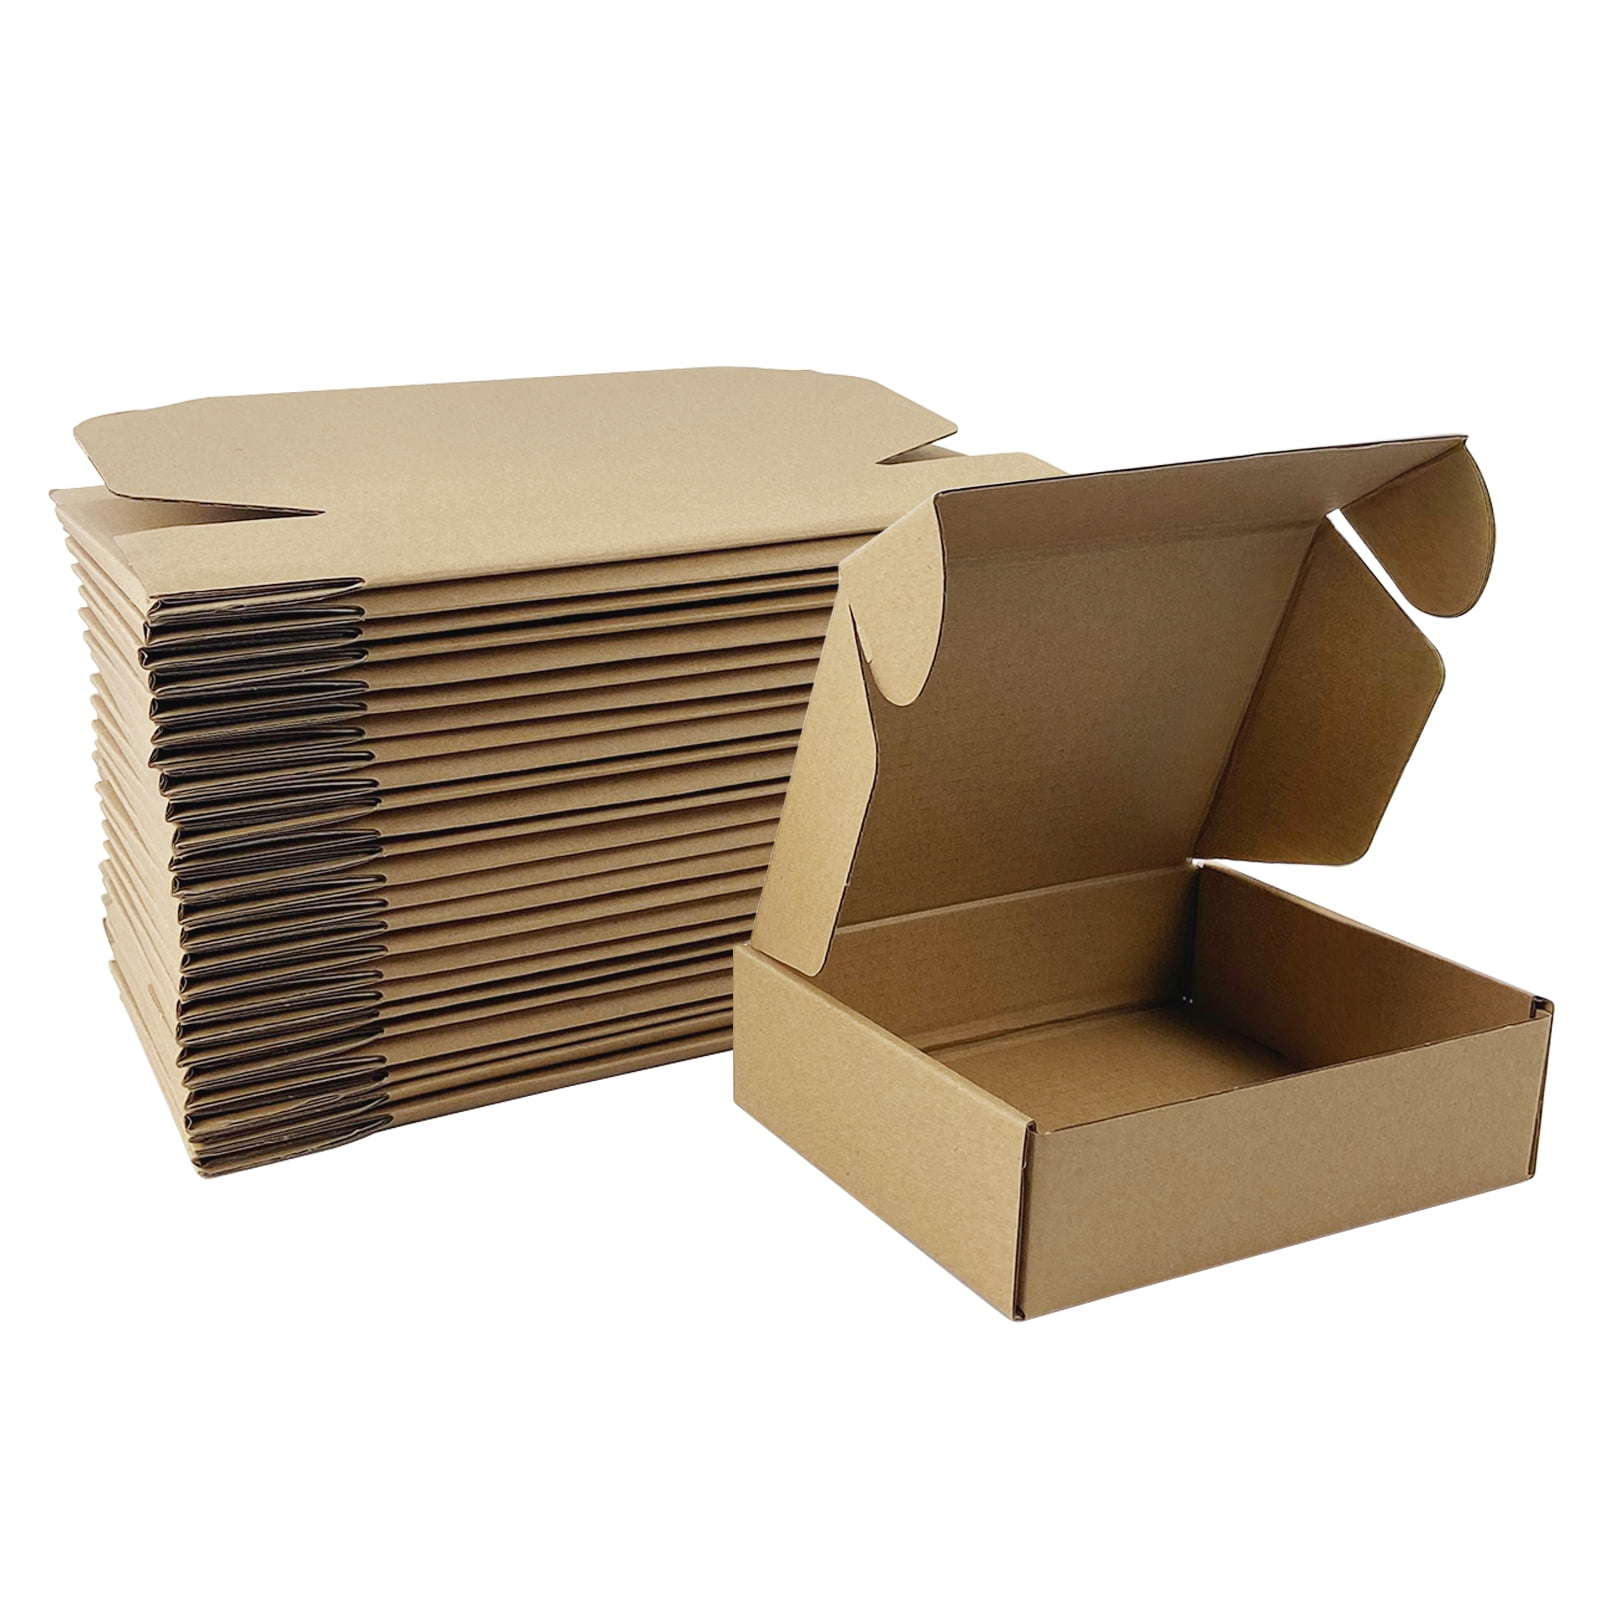 Euapko 7x5x2 Corrugated Box Mailers 25 Pack Brown Cardboard Small Shipping Boxes for Mailing 